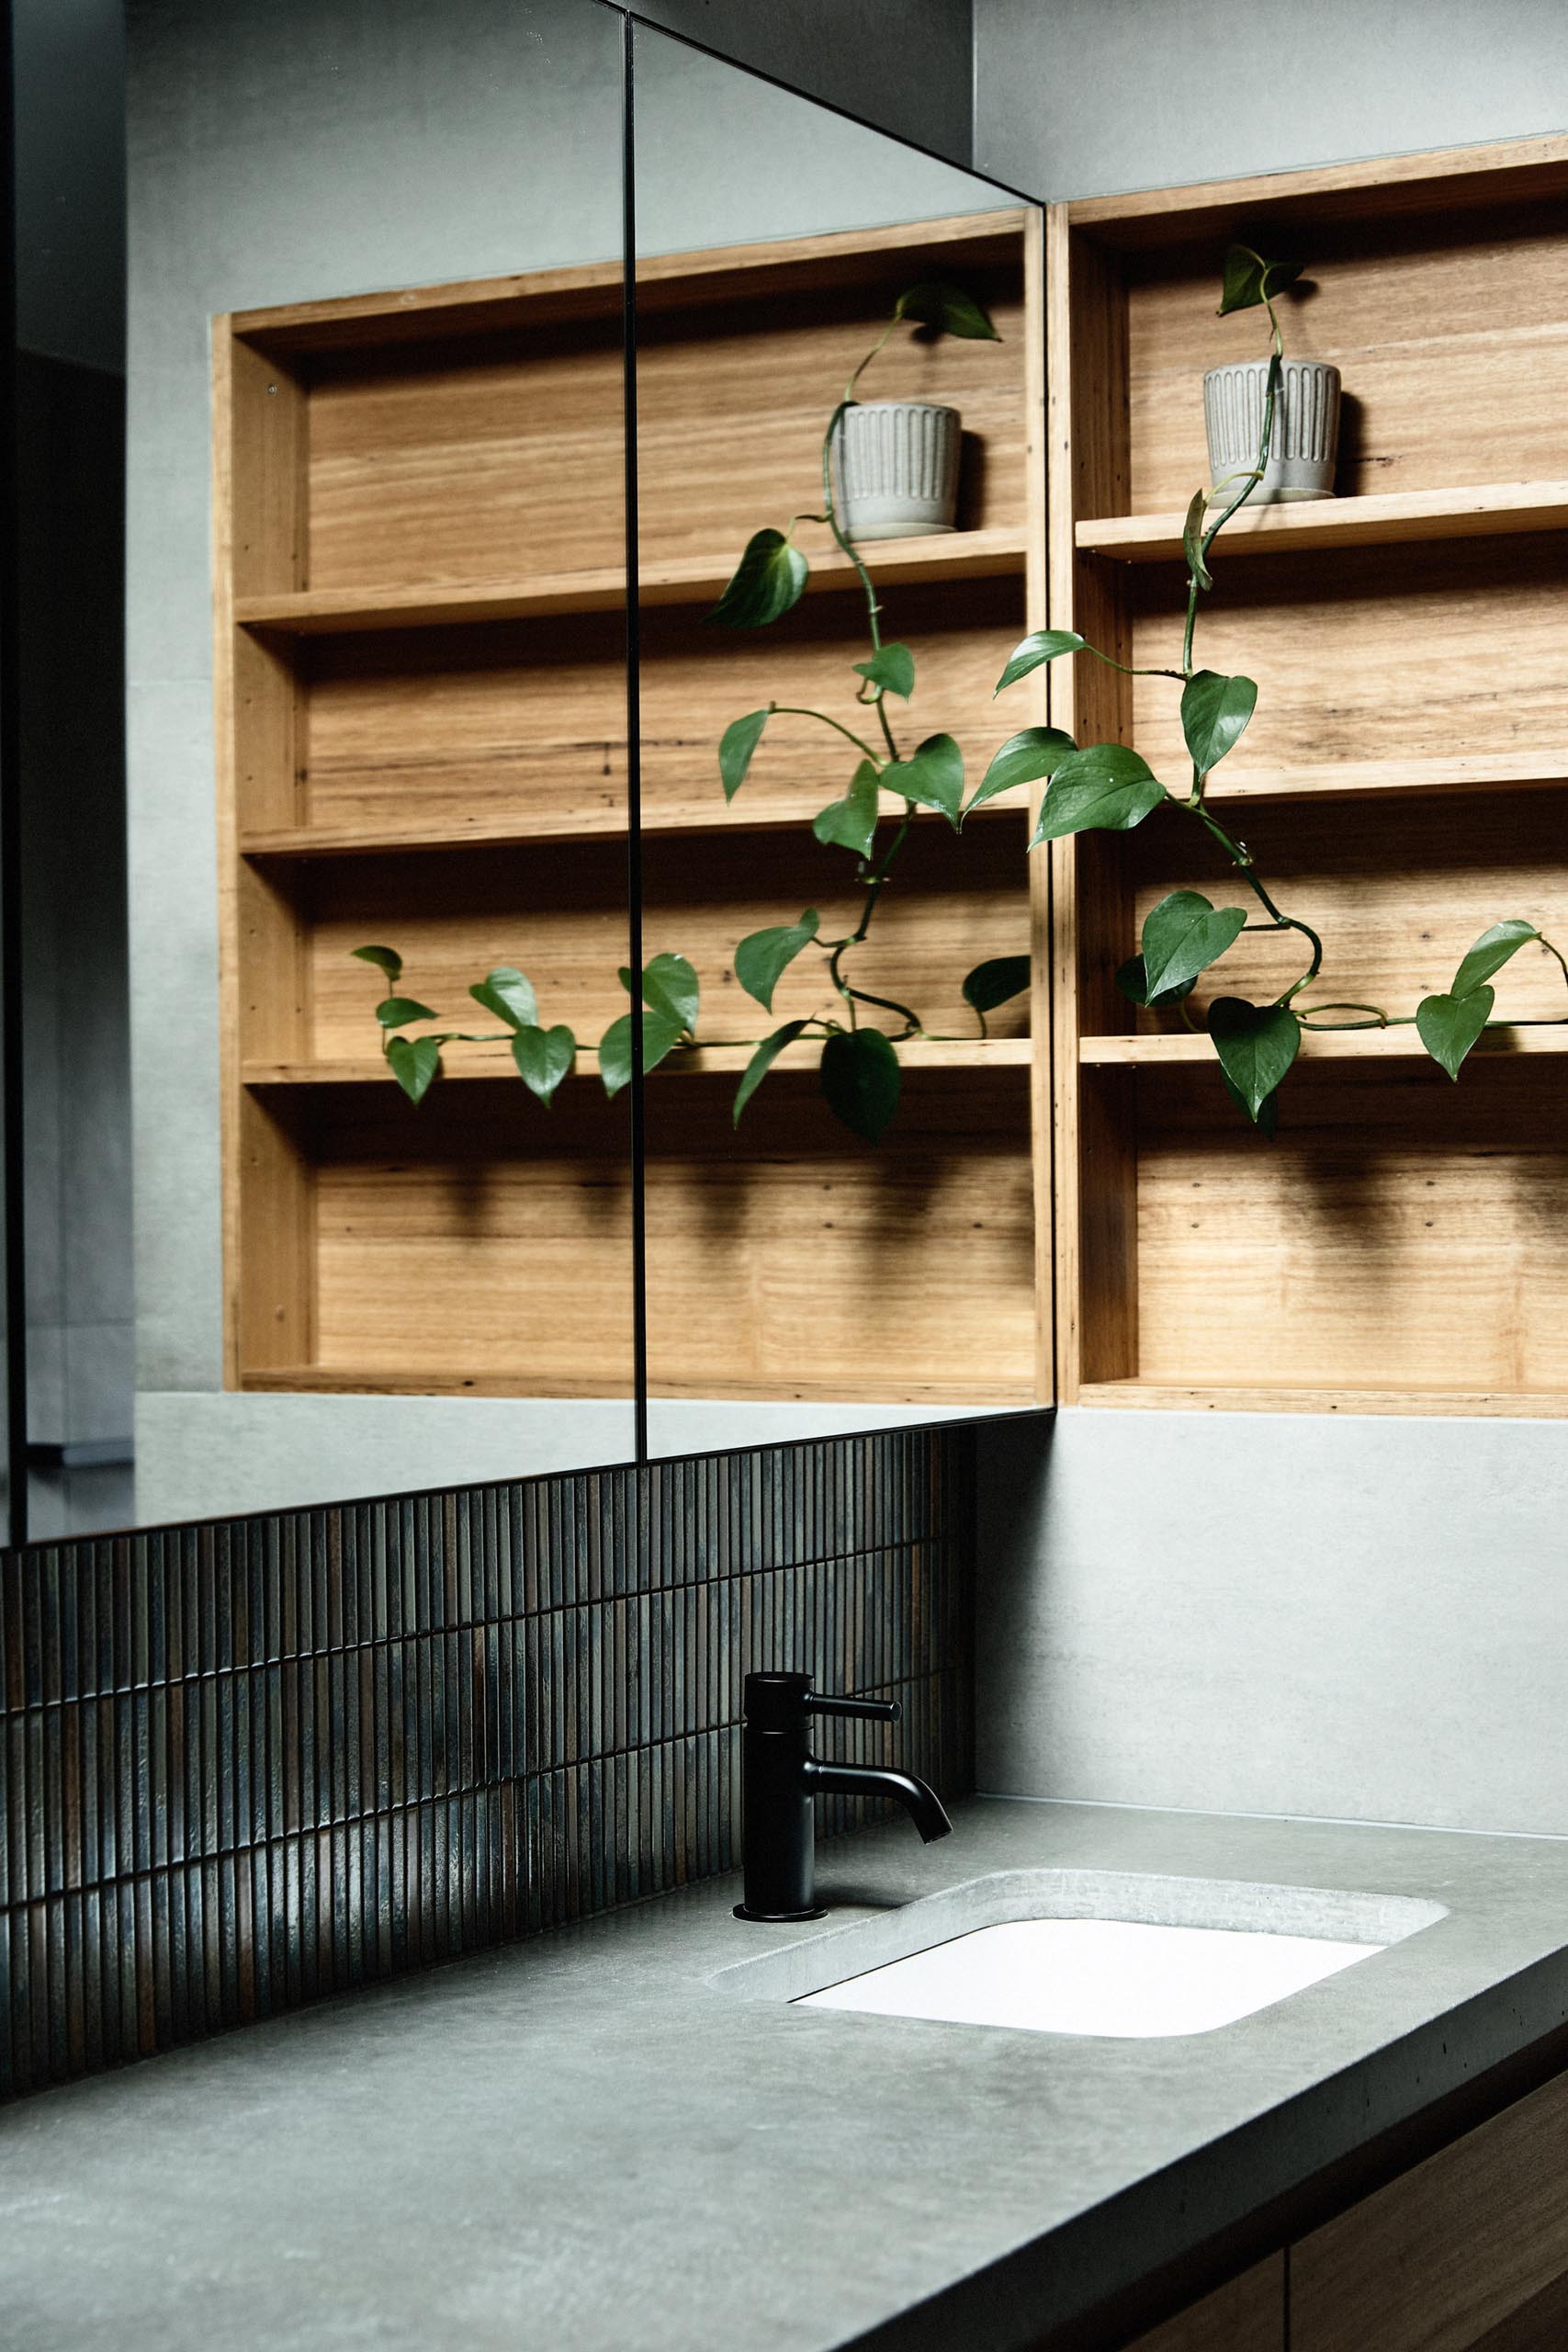 In this modern bathroom, gray walls and floors are accented by a wood-lined shelving niche, small metallic tiles, and a white freestanding bathtub.